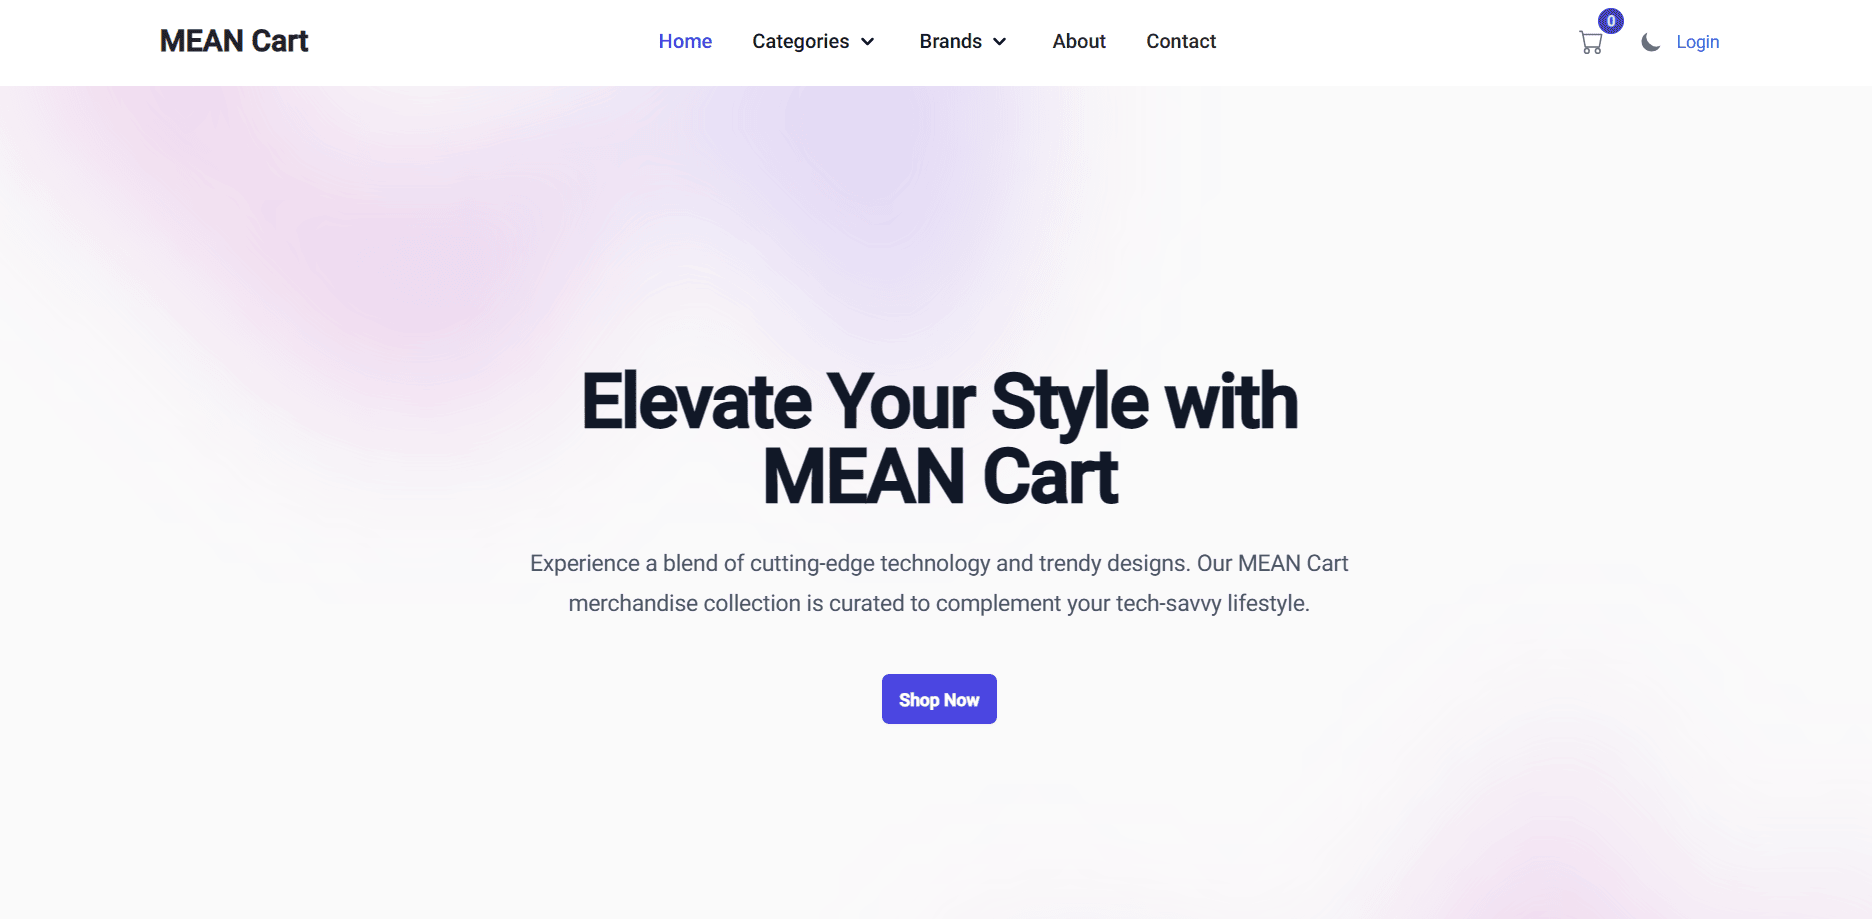 MEAN Cart project image.